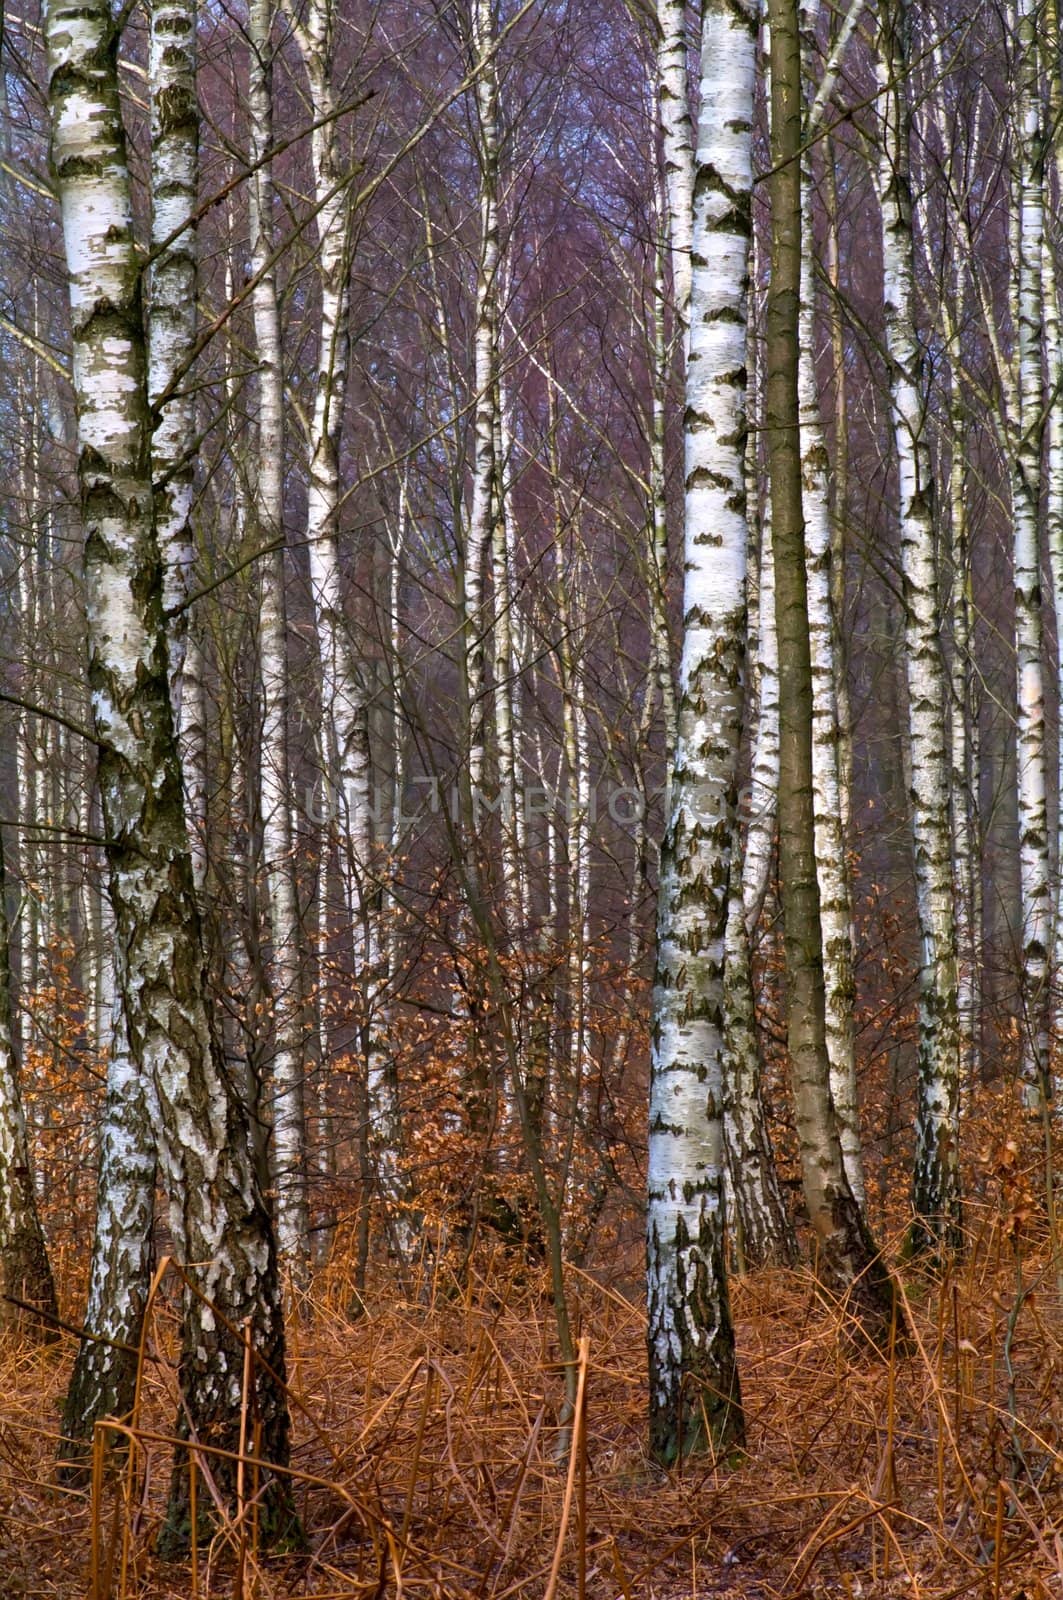 Birch trunks in the forest a spring day